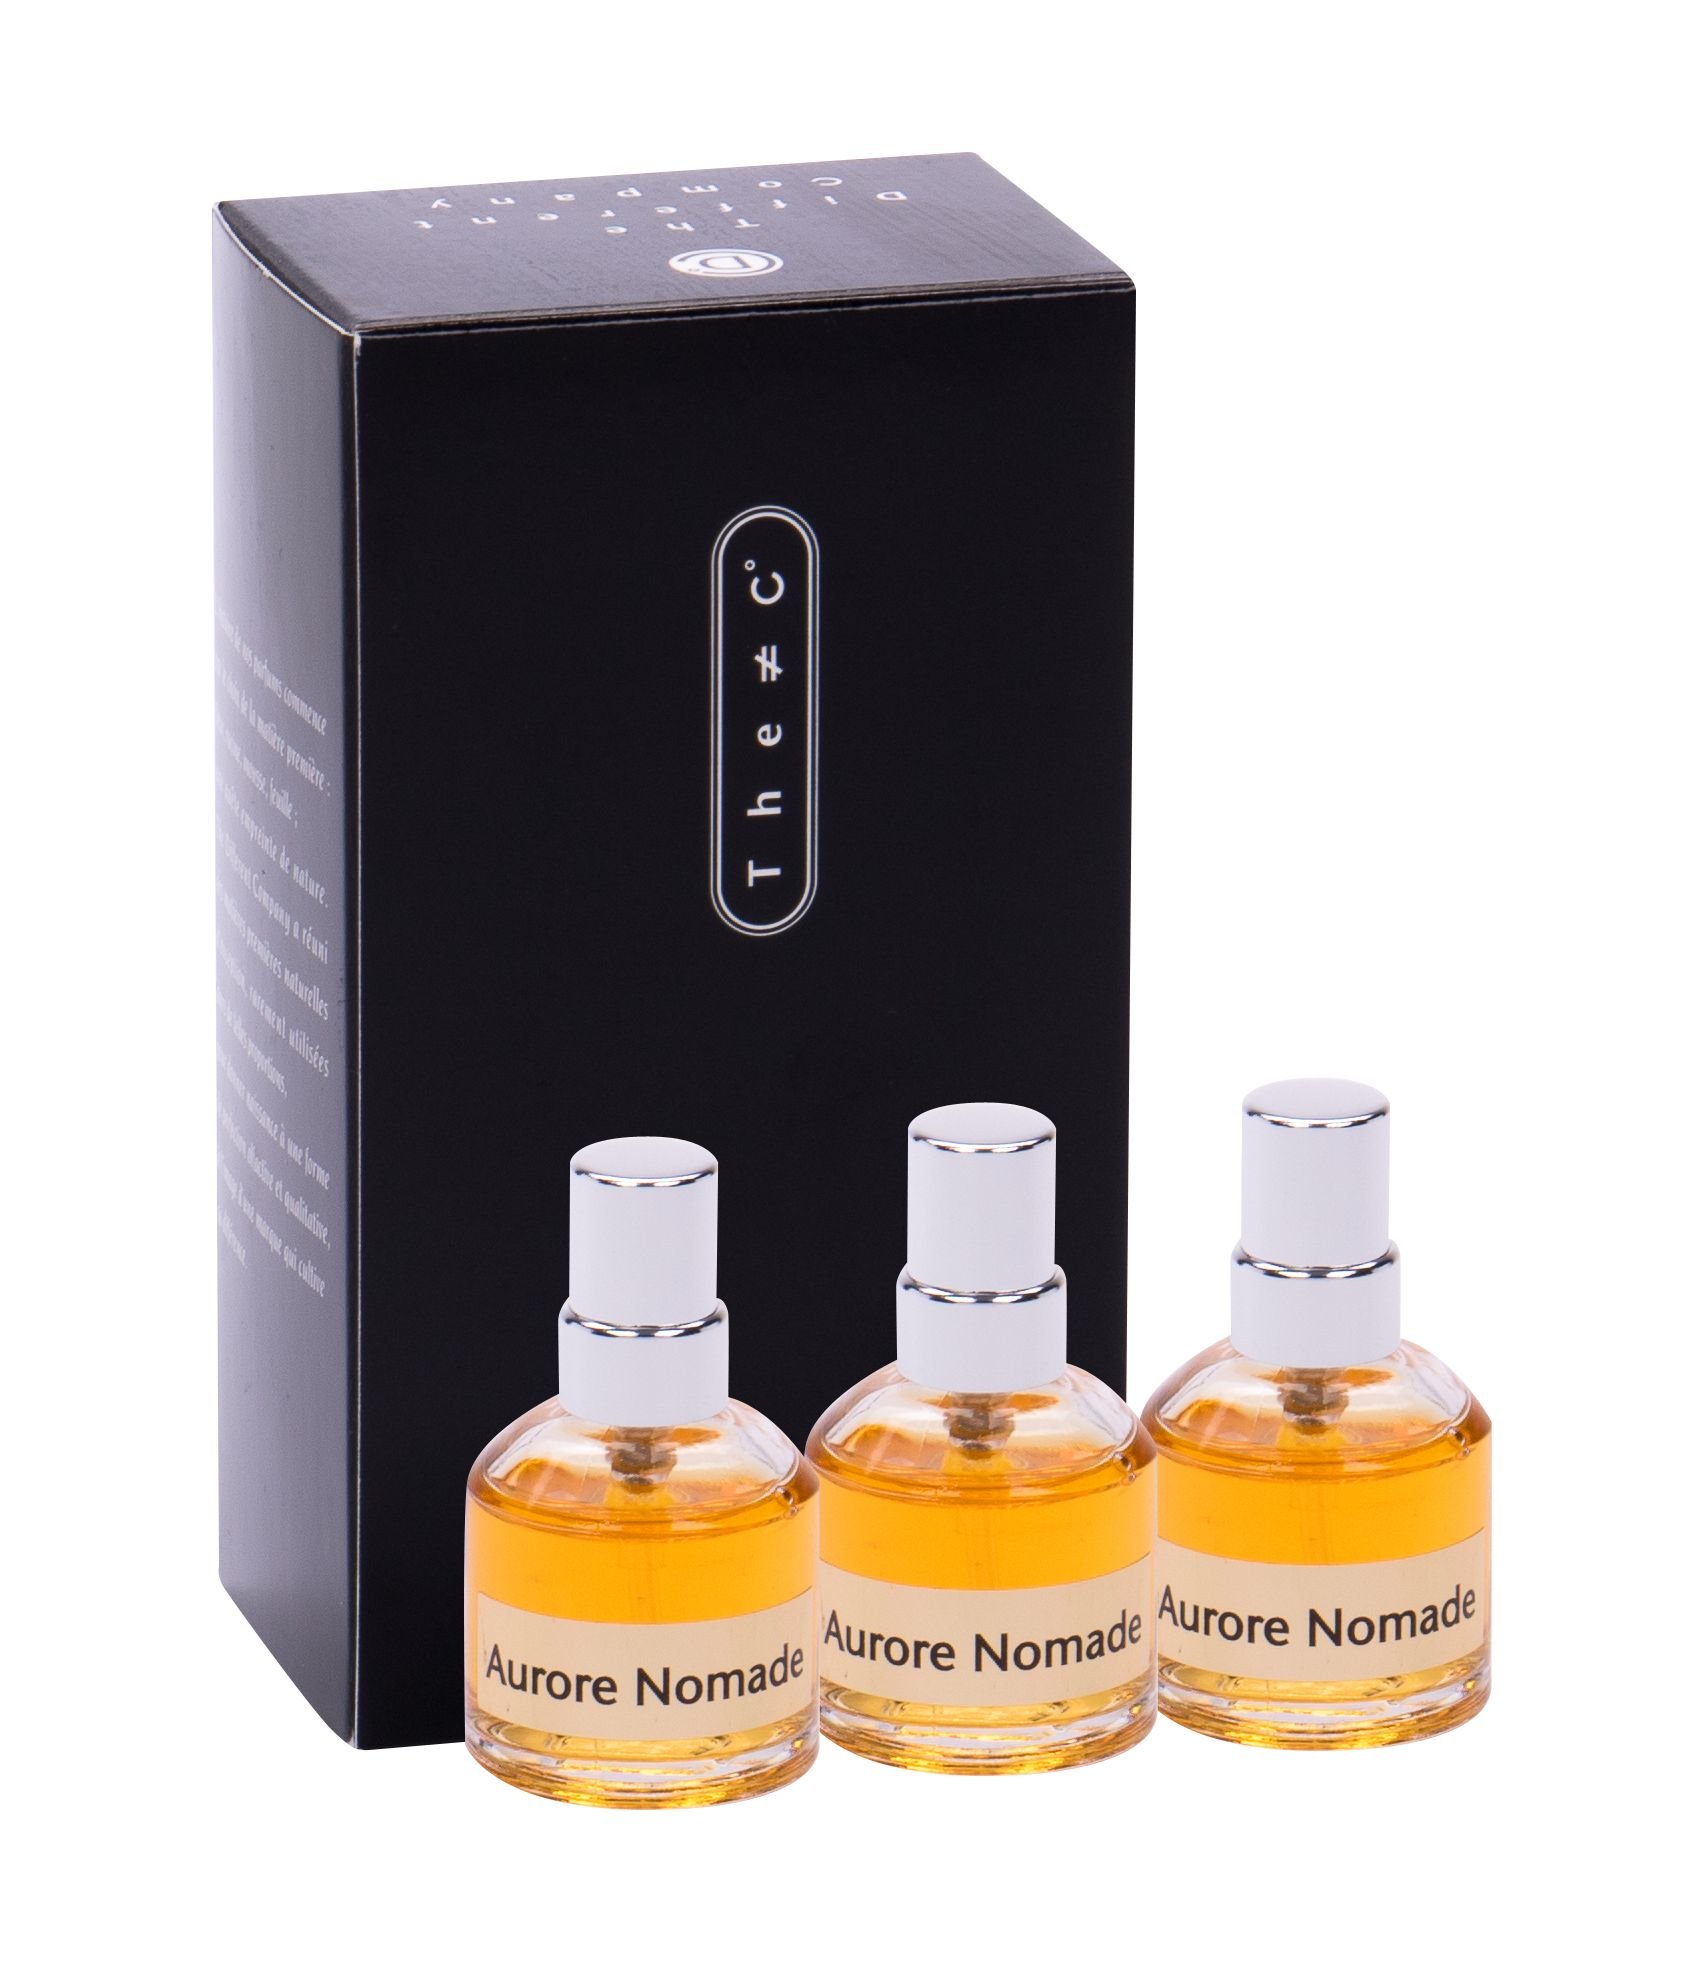 The Different Company Collection Excessive Aurore Nomade 3x10ml NIŠINIAI Kvepalai Unisex EDP